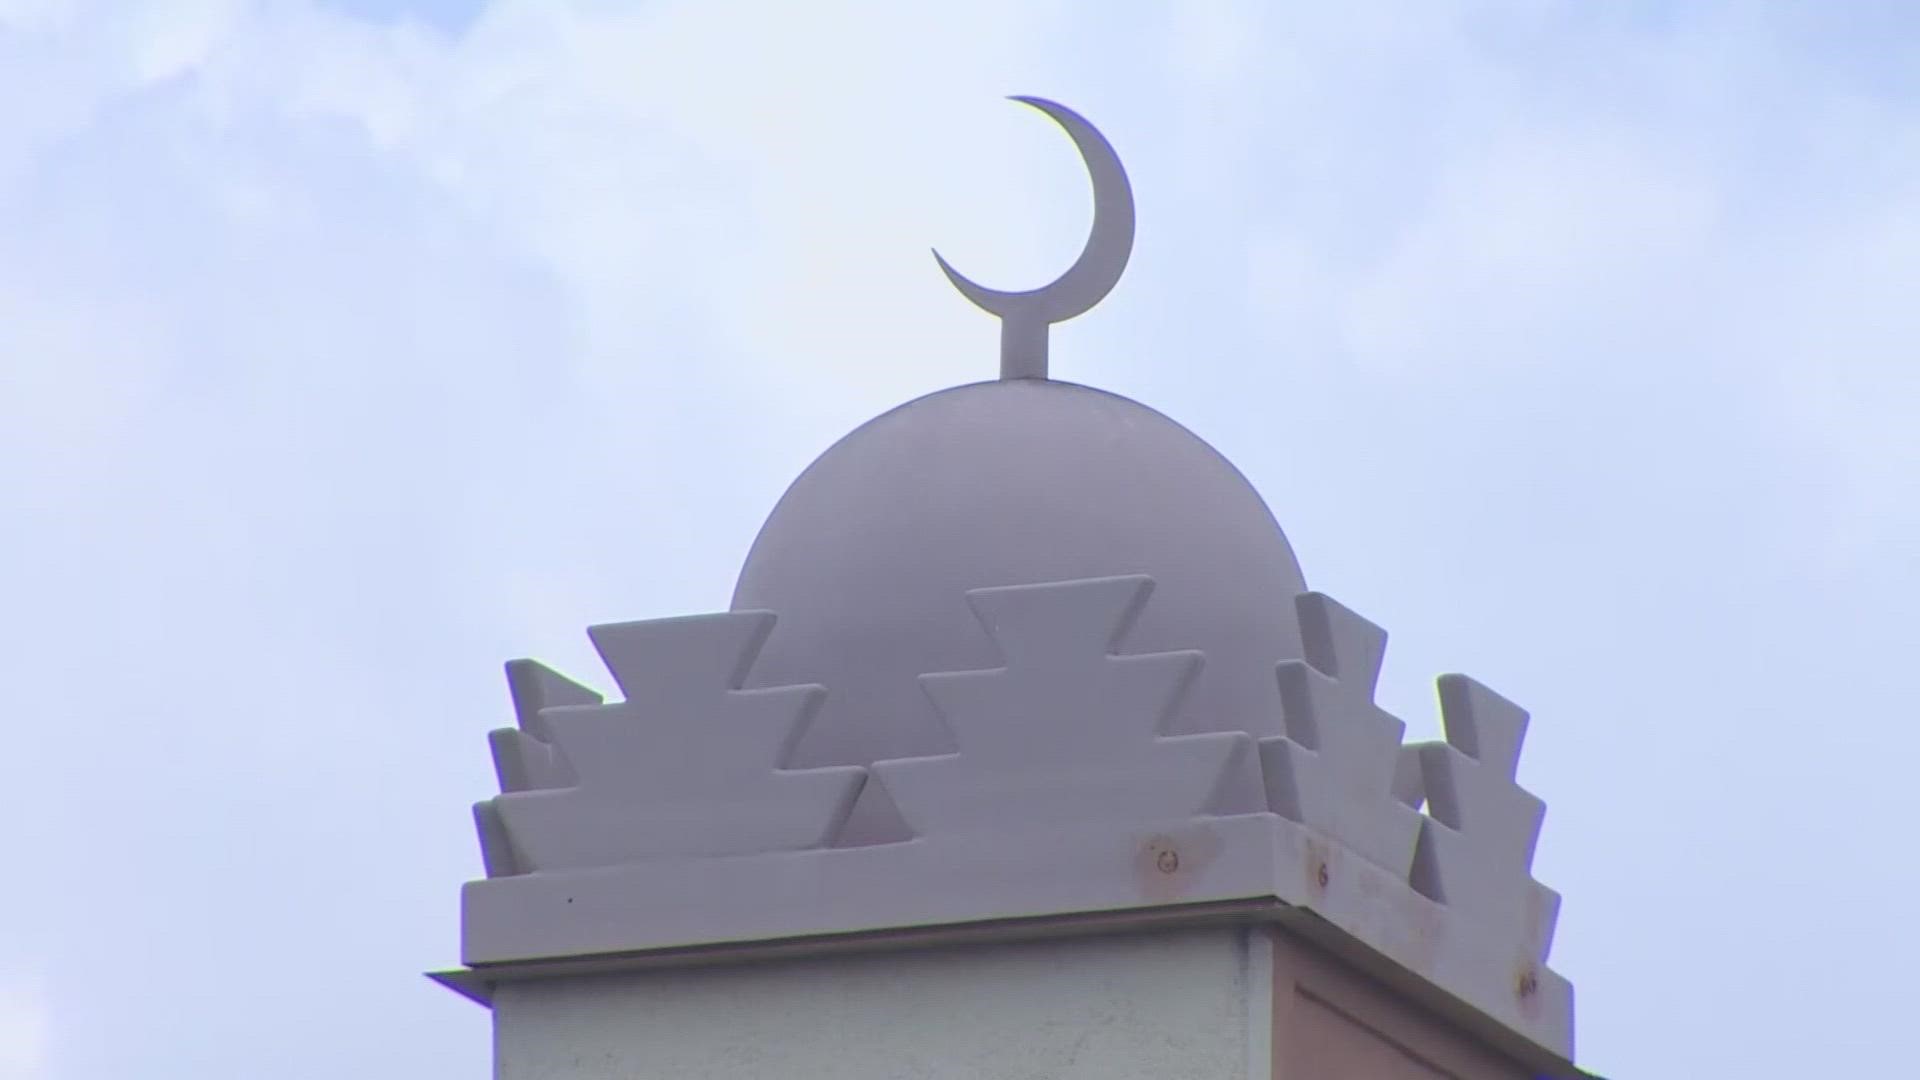 Houston Mayor Sylvester Turner said there will be more security around mosques in the city after a string of killings of Muslims in Albuquerque, NM.